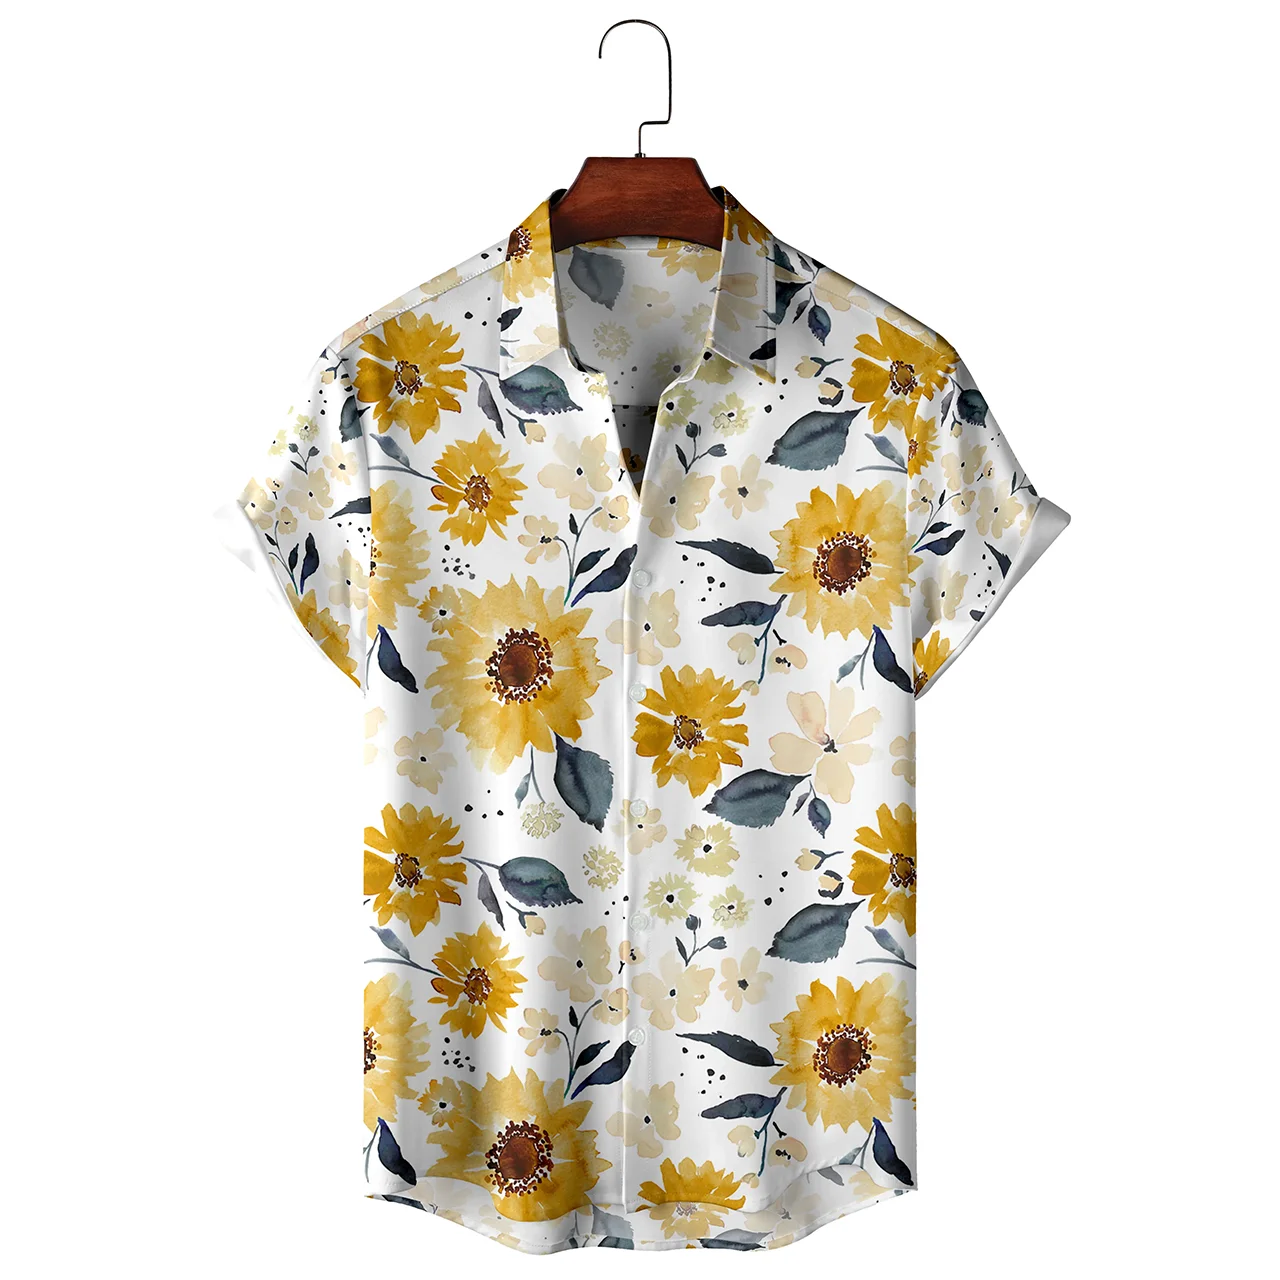 

Men's and Women's Casual Shirts Fresh Floral Print Pattern Seaside Short Sleeve Button-Down Shirt Tops